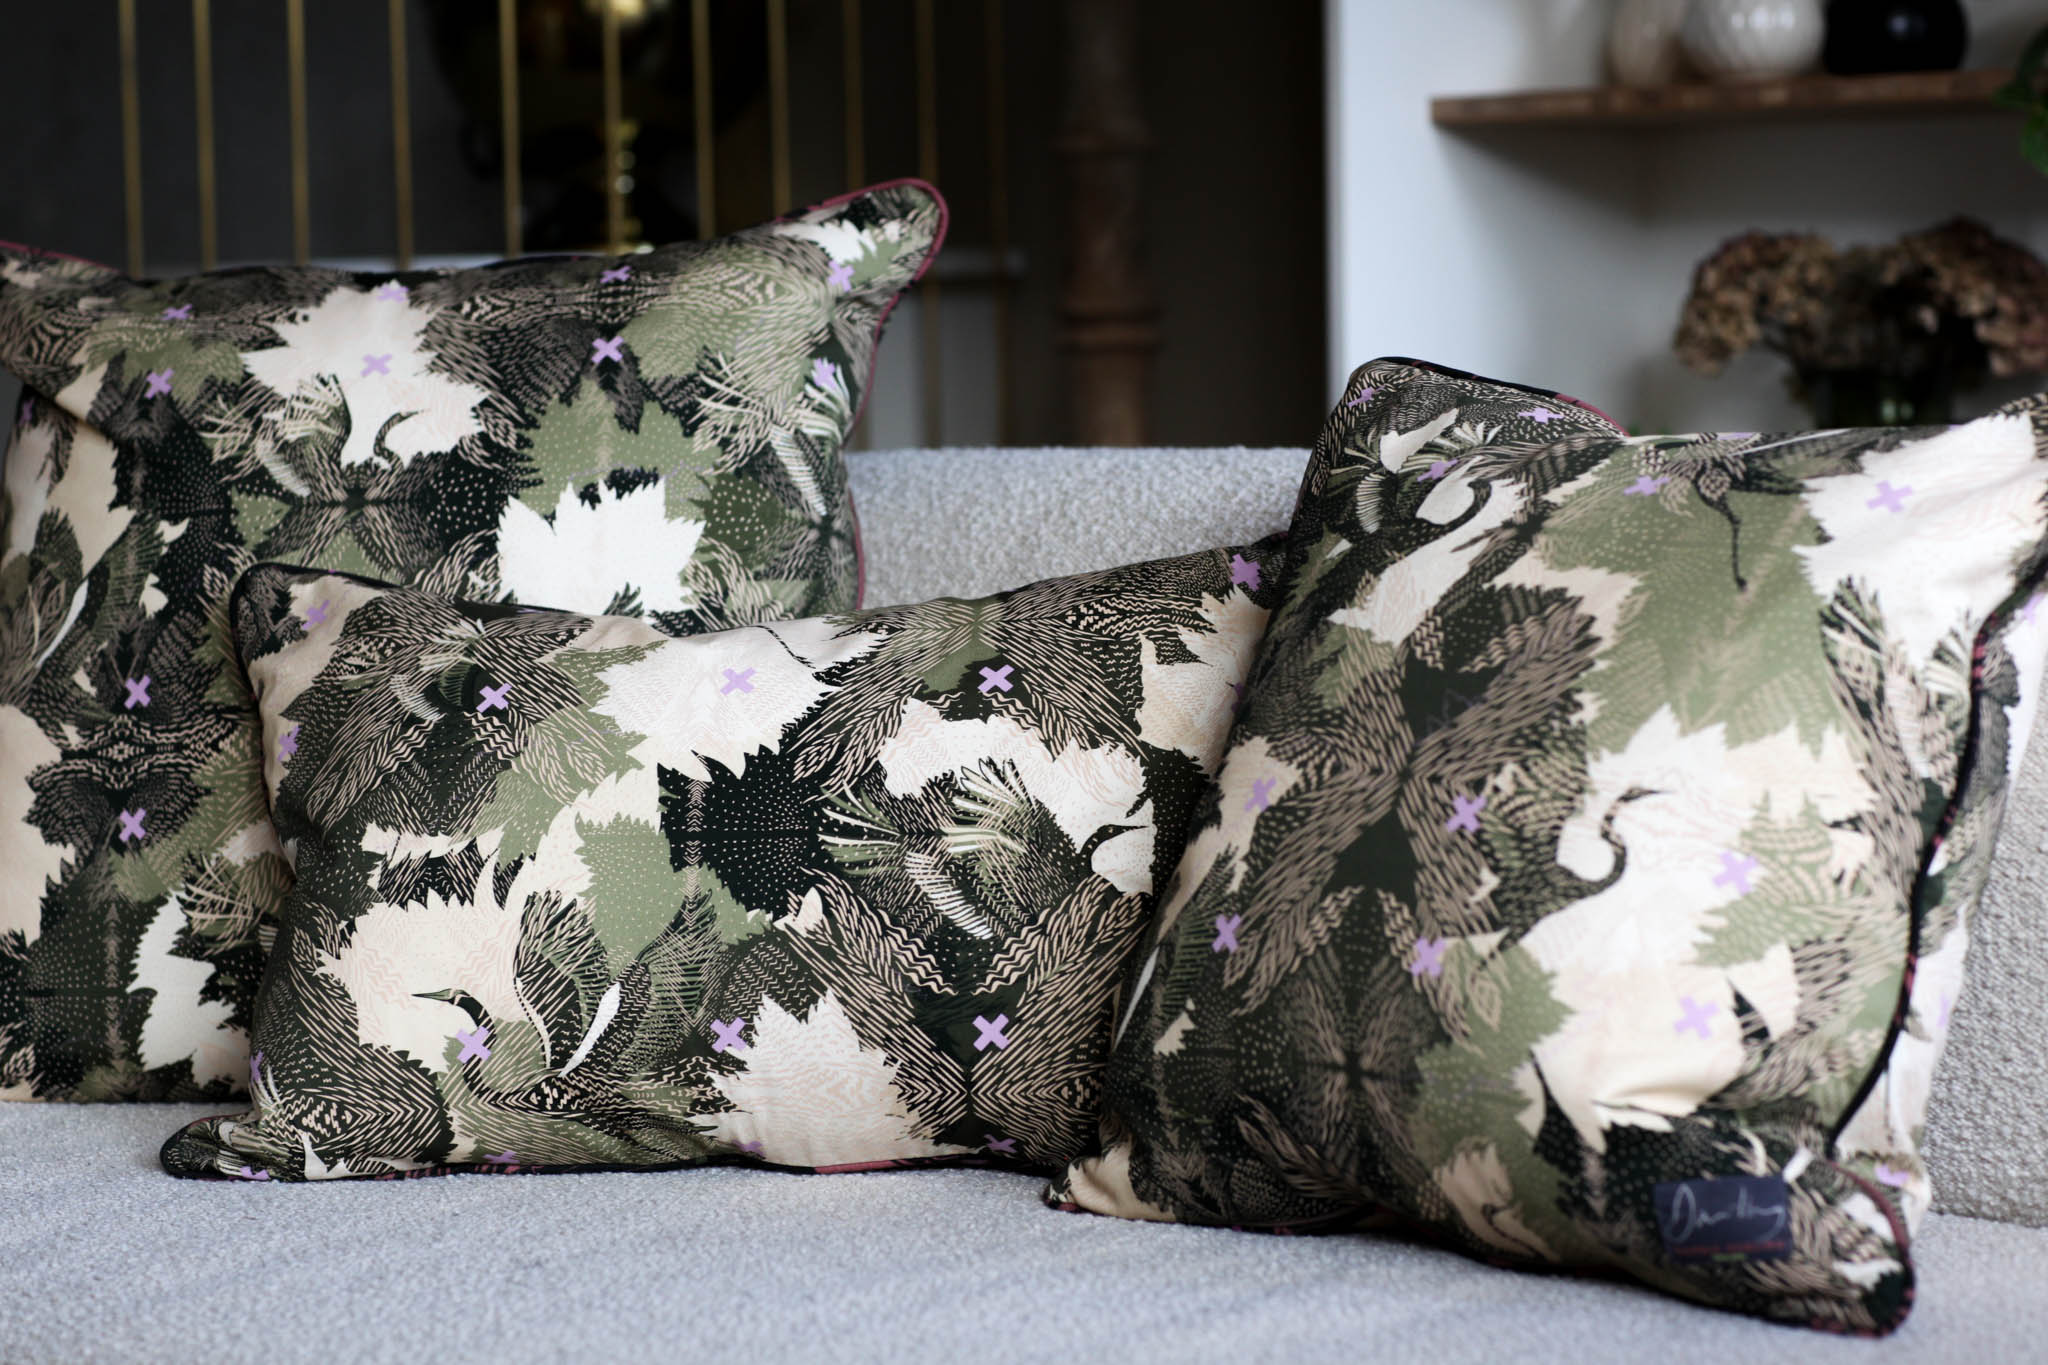 Hand printed cushions of different sizes on a white sofa